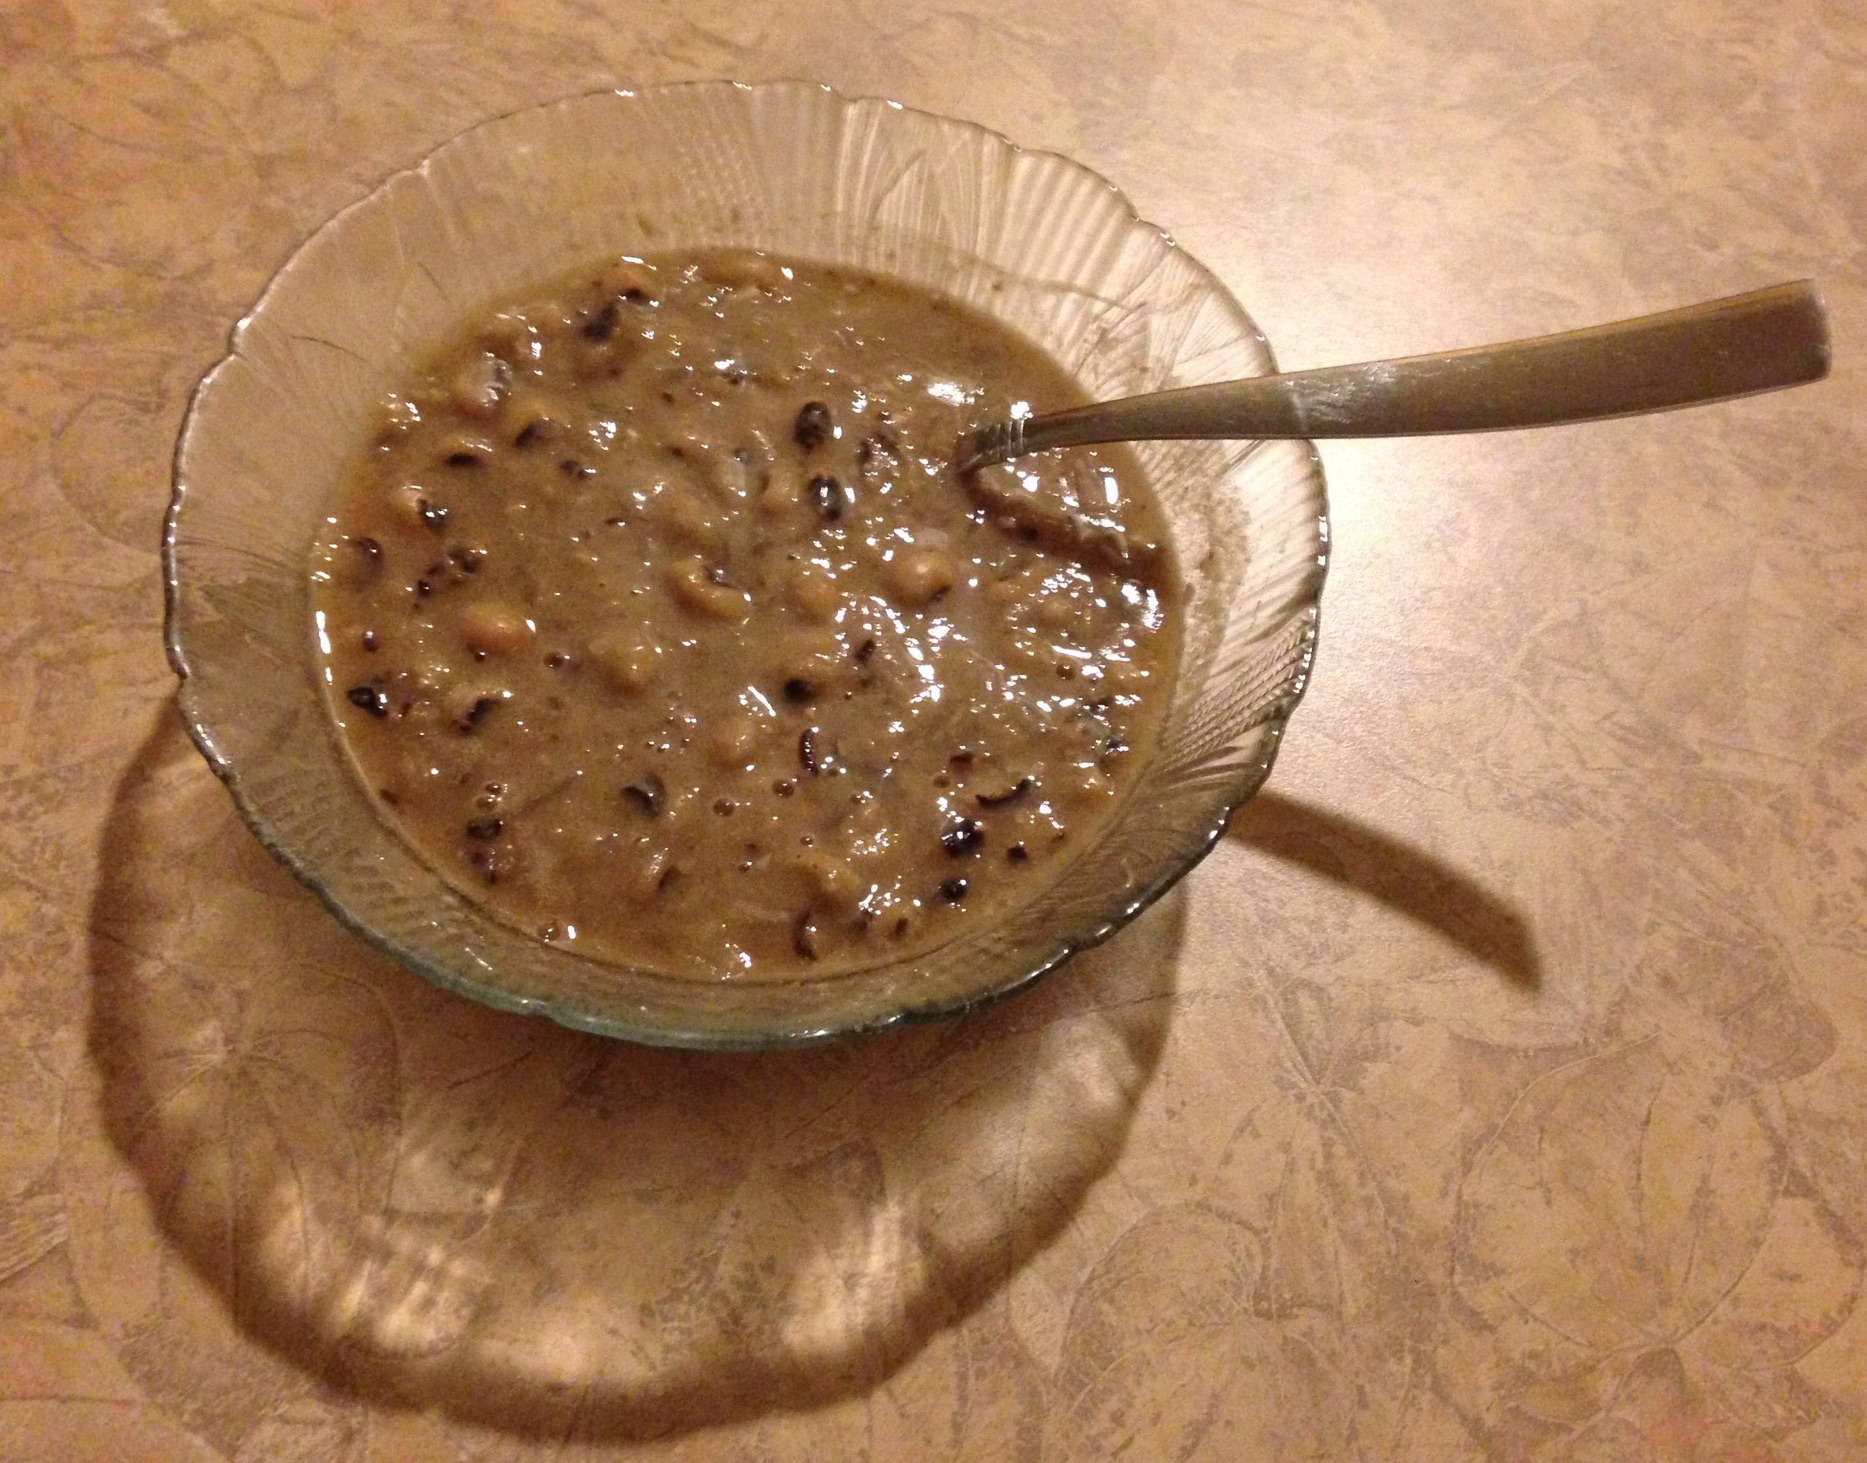 holiday eating reminds us that for good luck in the new year, you need to eat some black-eyed peas.